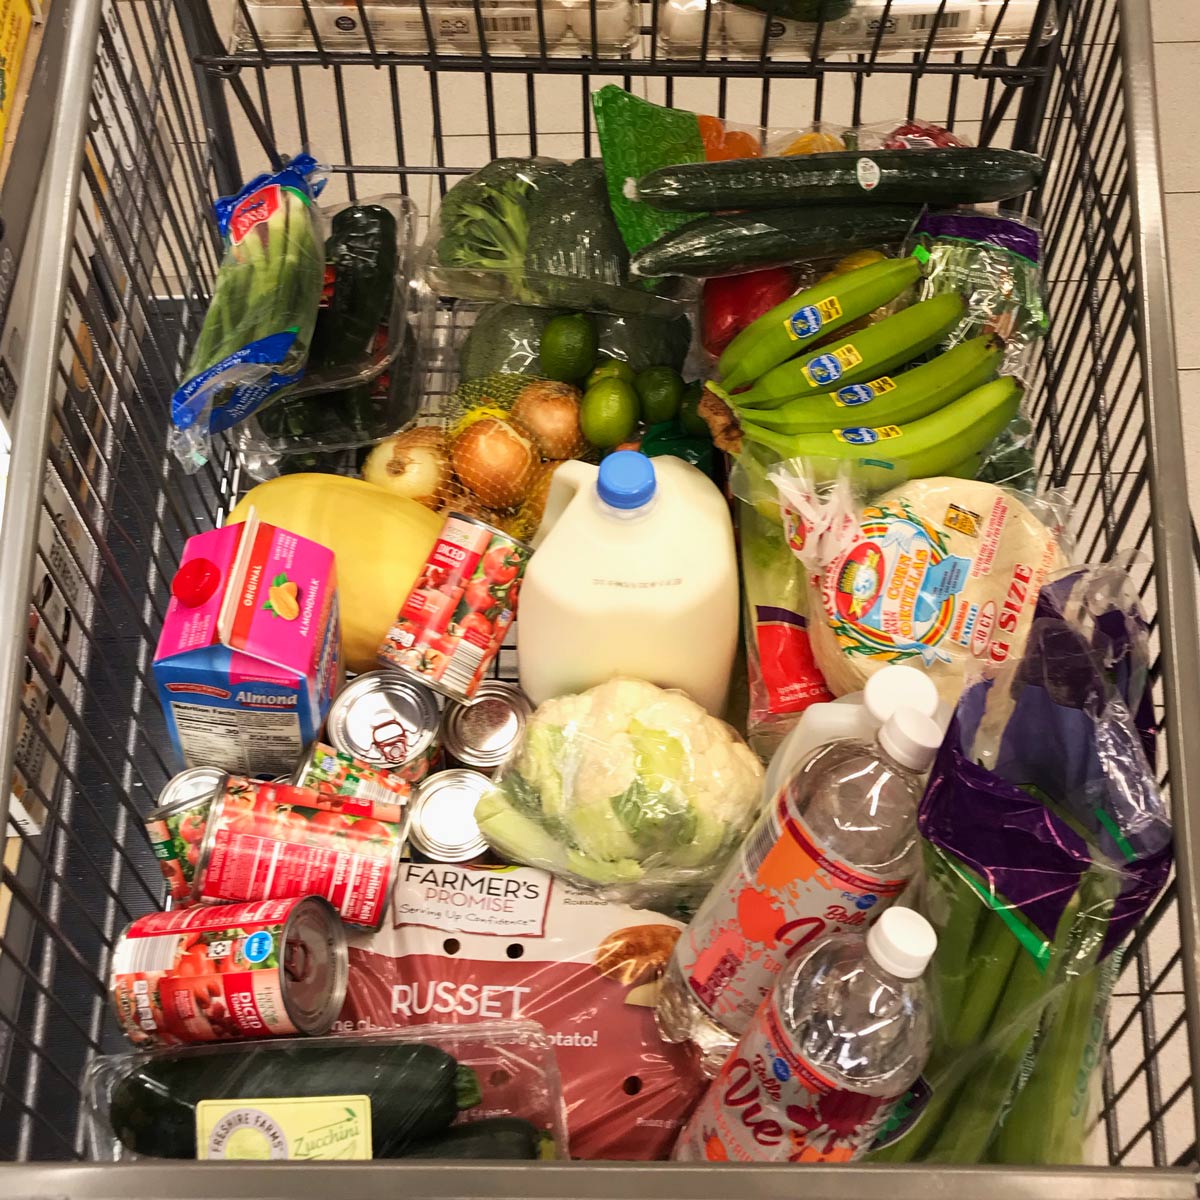 ALDI cart full of mostly fresh produce with some canned goods and milk added.